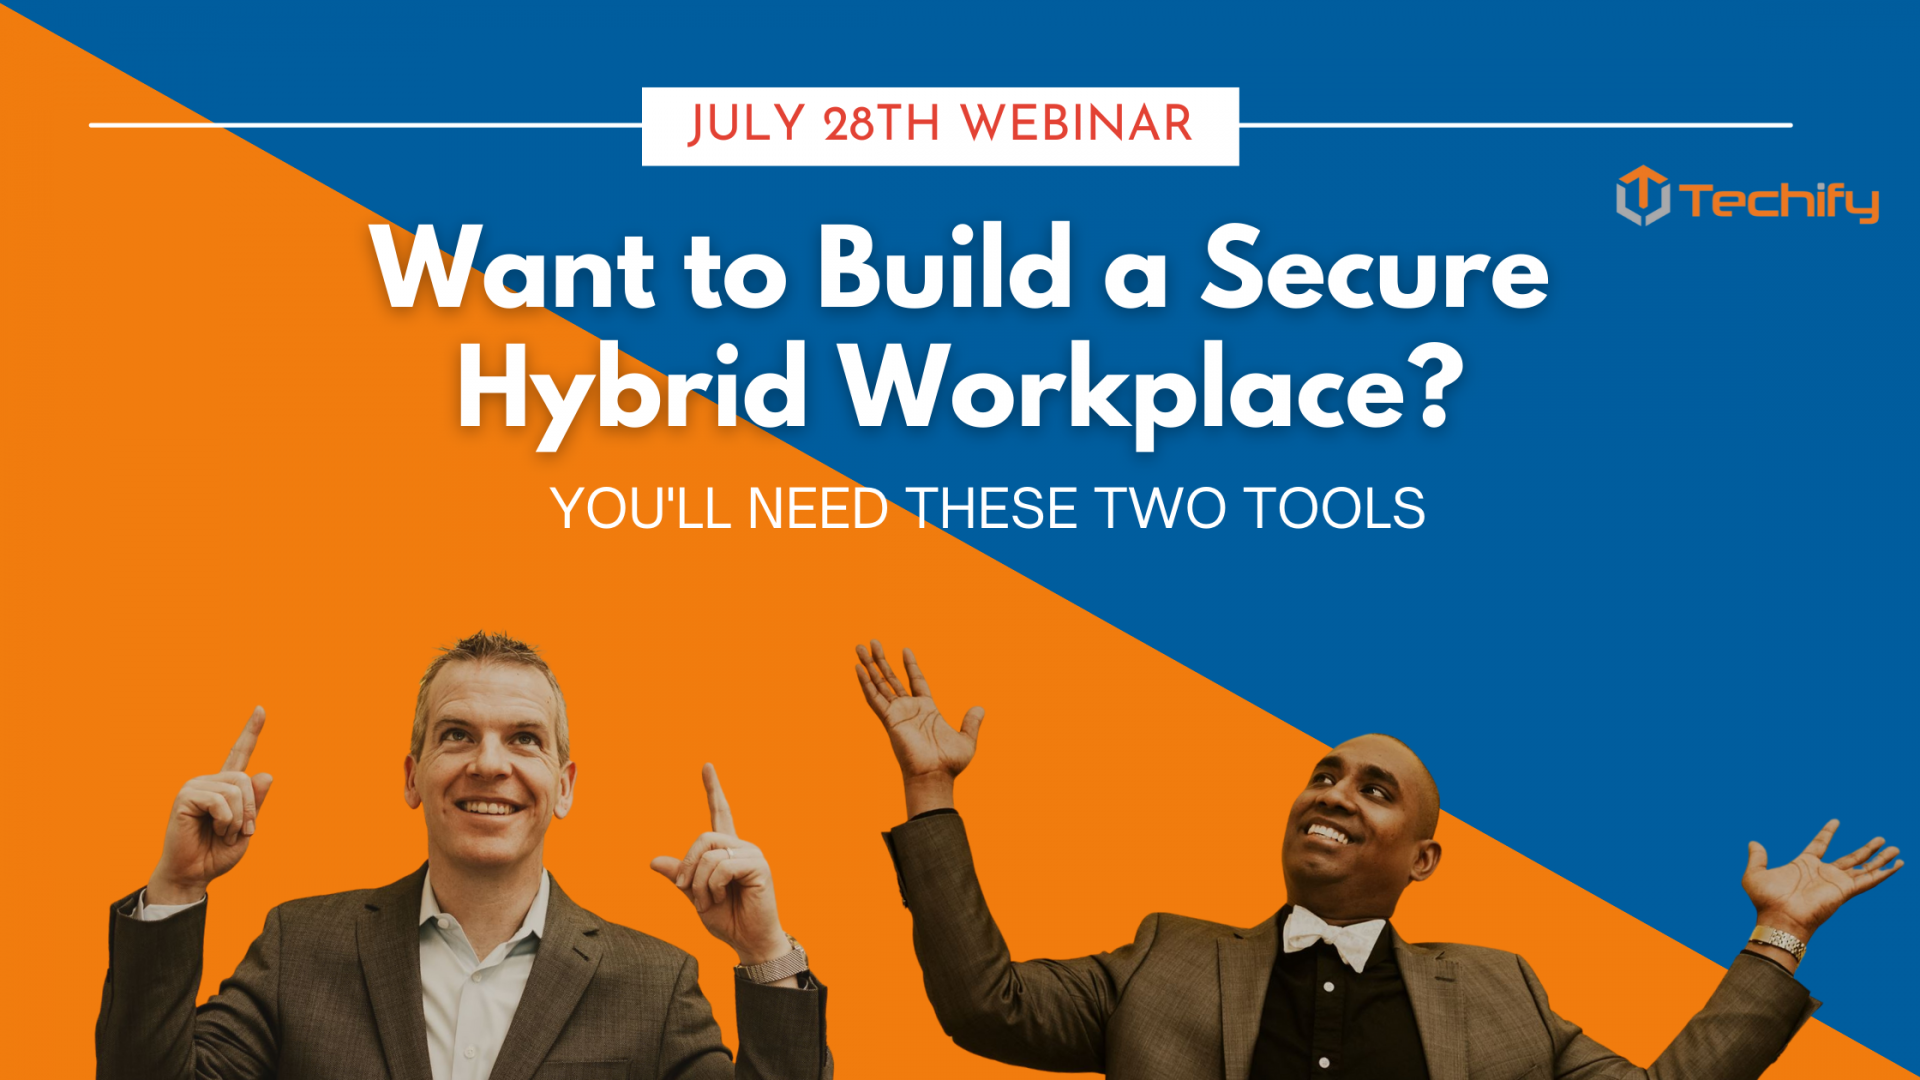 Image Promoting the July 2022 Webinar - Brendan and Jermaine pointing at the wording "Want to Build a Secure Hybrid Workplace?